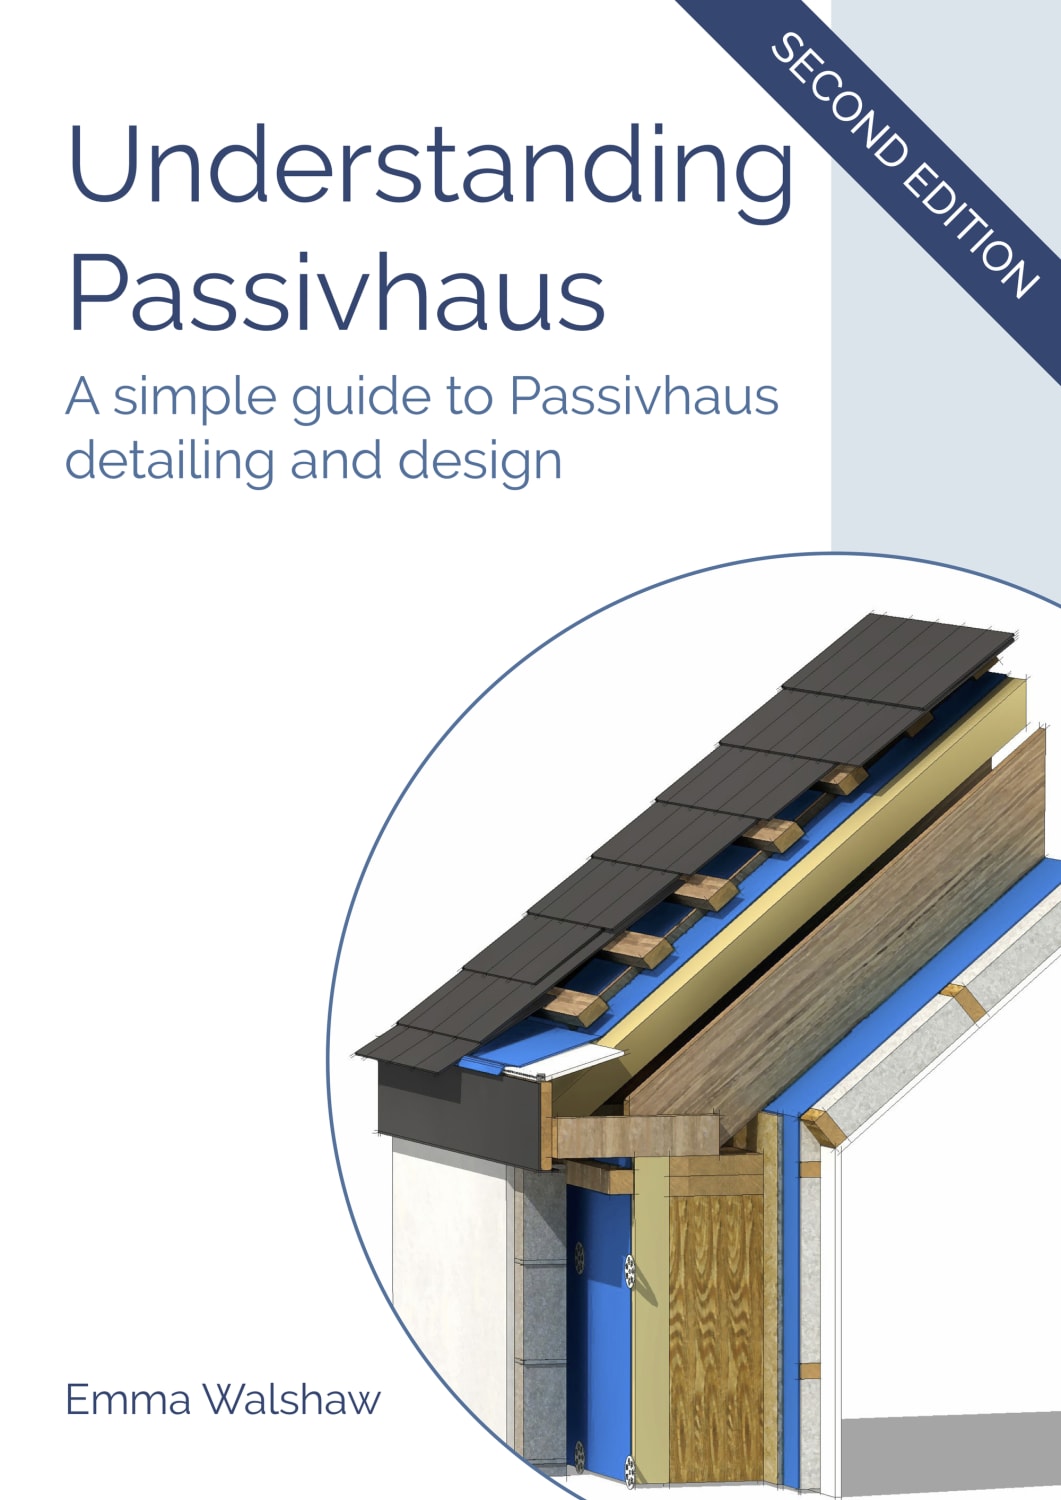 Understanding Passivhaus - The Simple Guide to Passivhaus Detailing and Design